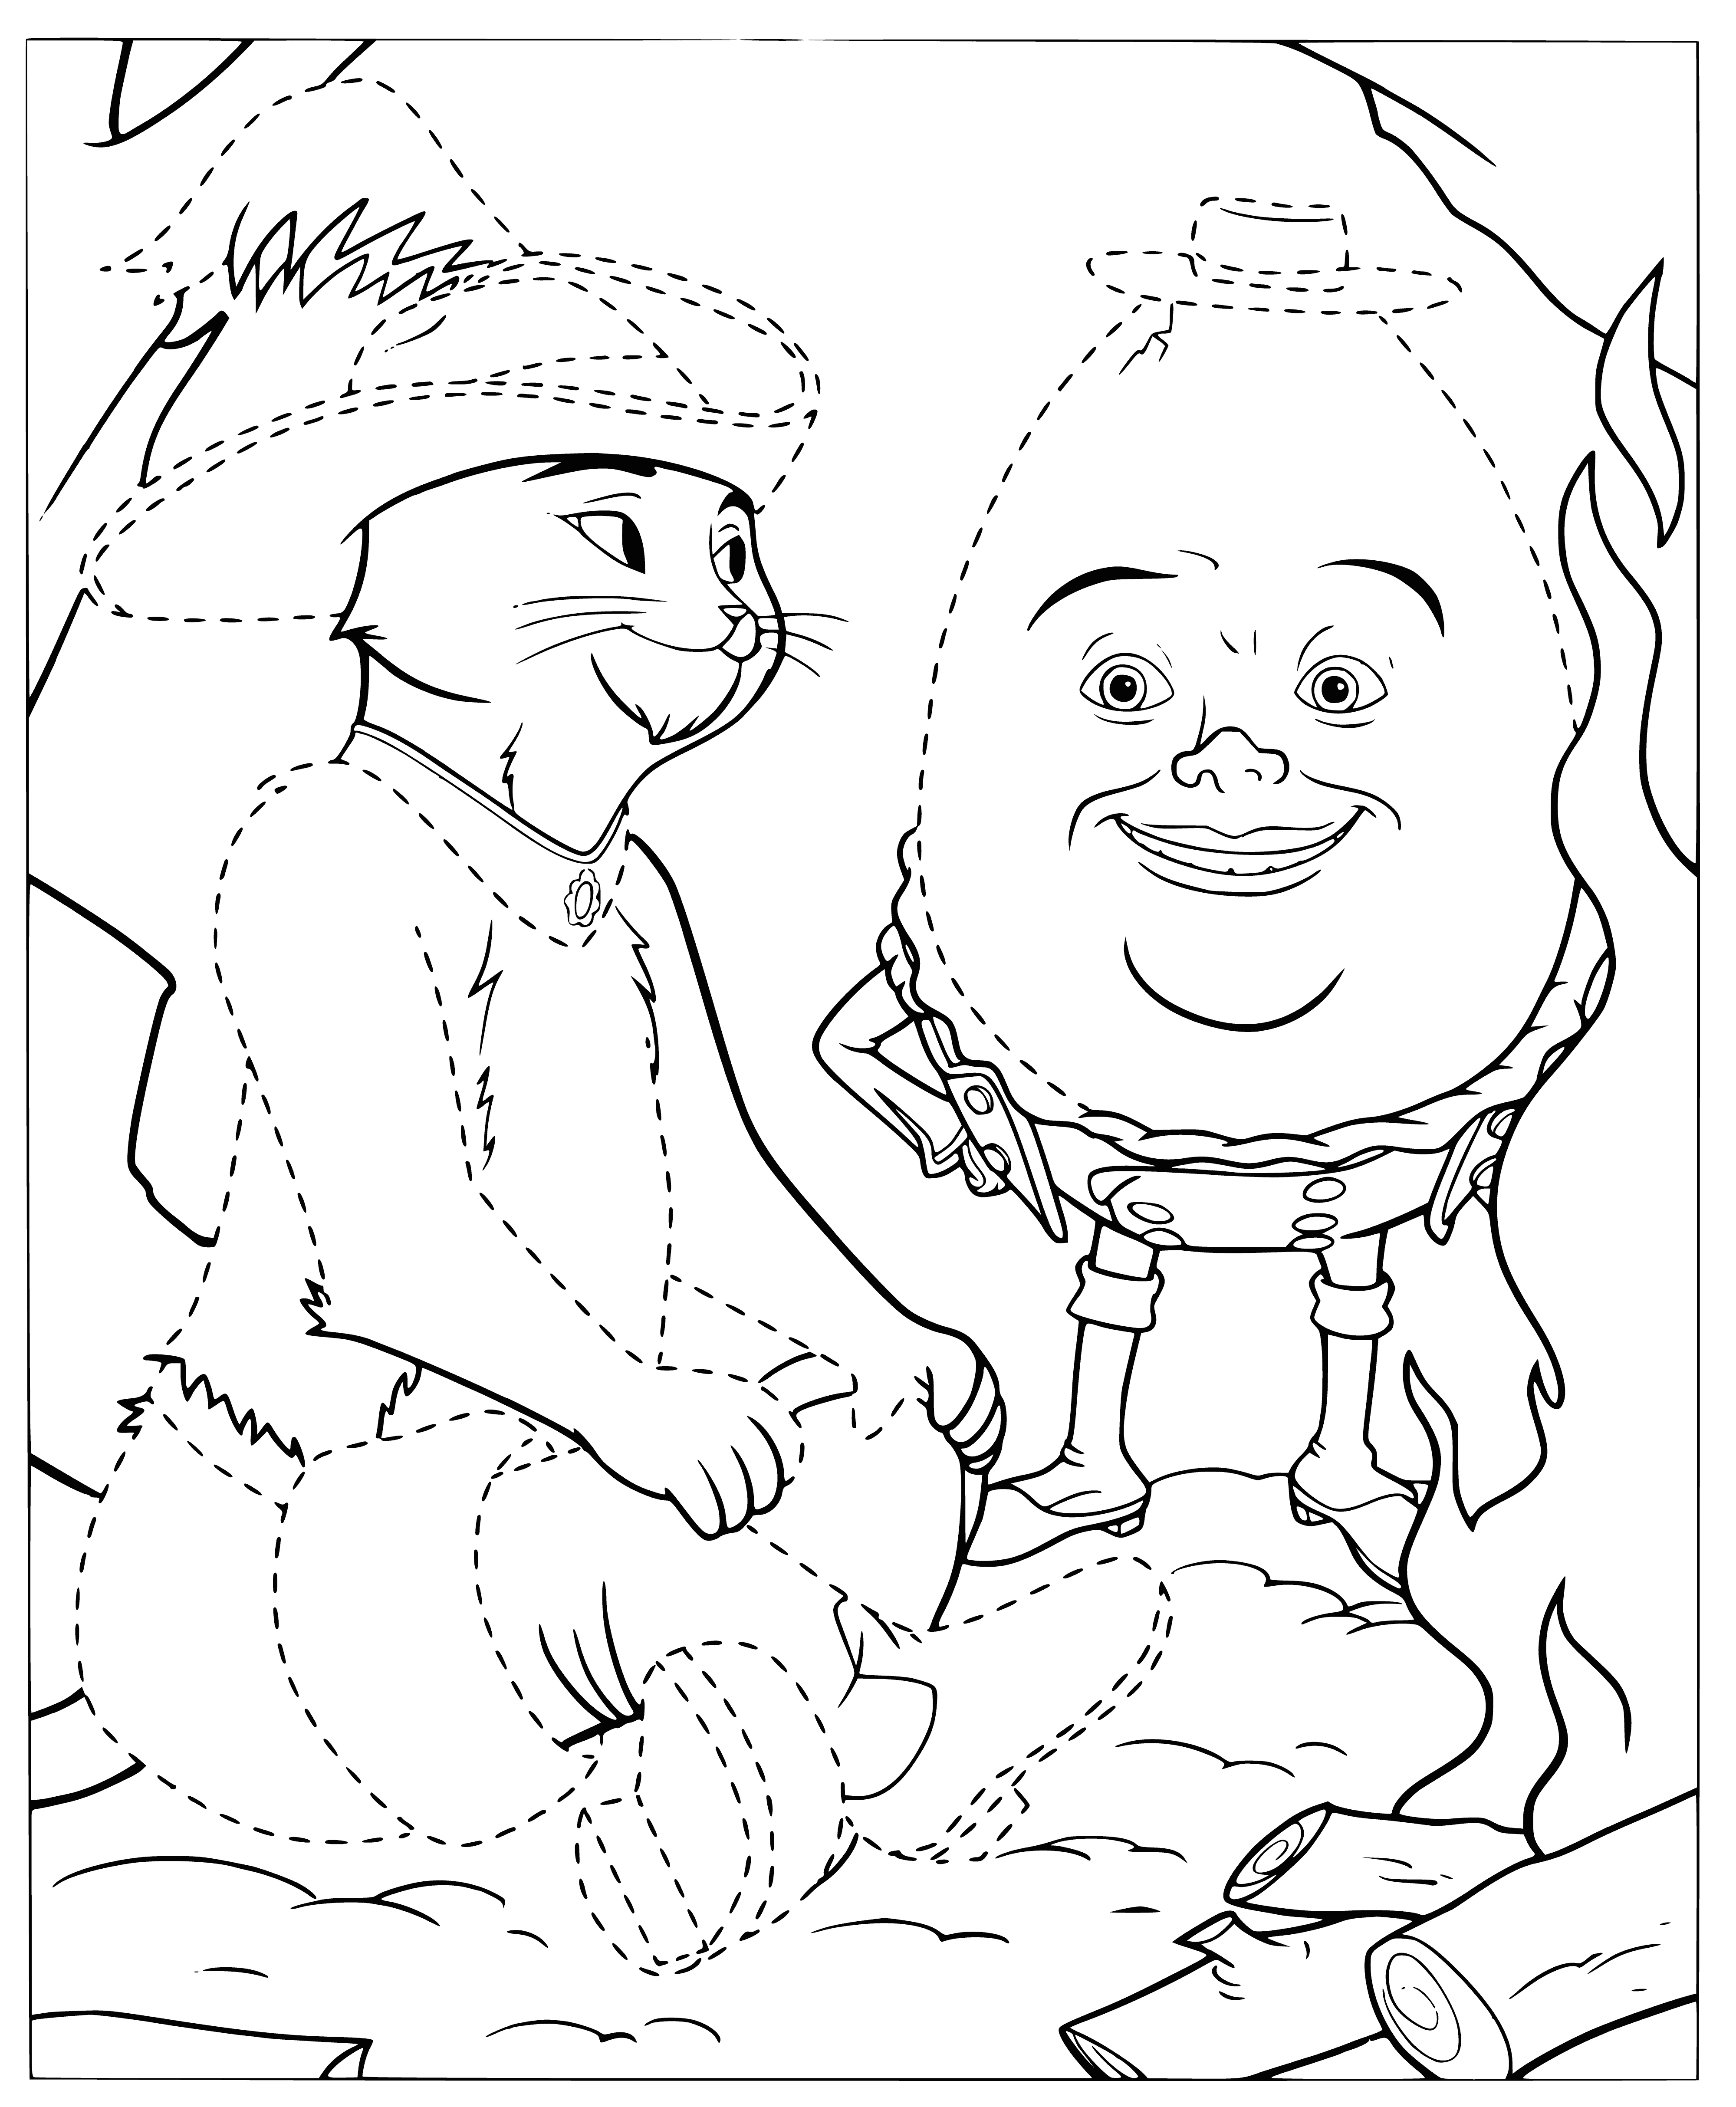 coloring page: Woman and cat look at each other, the cat wearing boots, the woman with a broom.